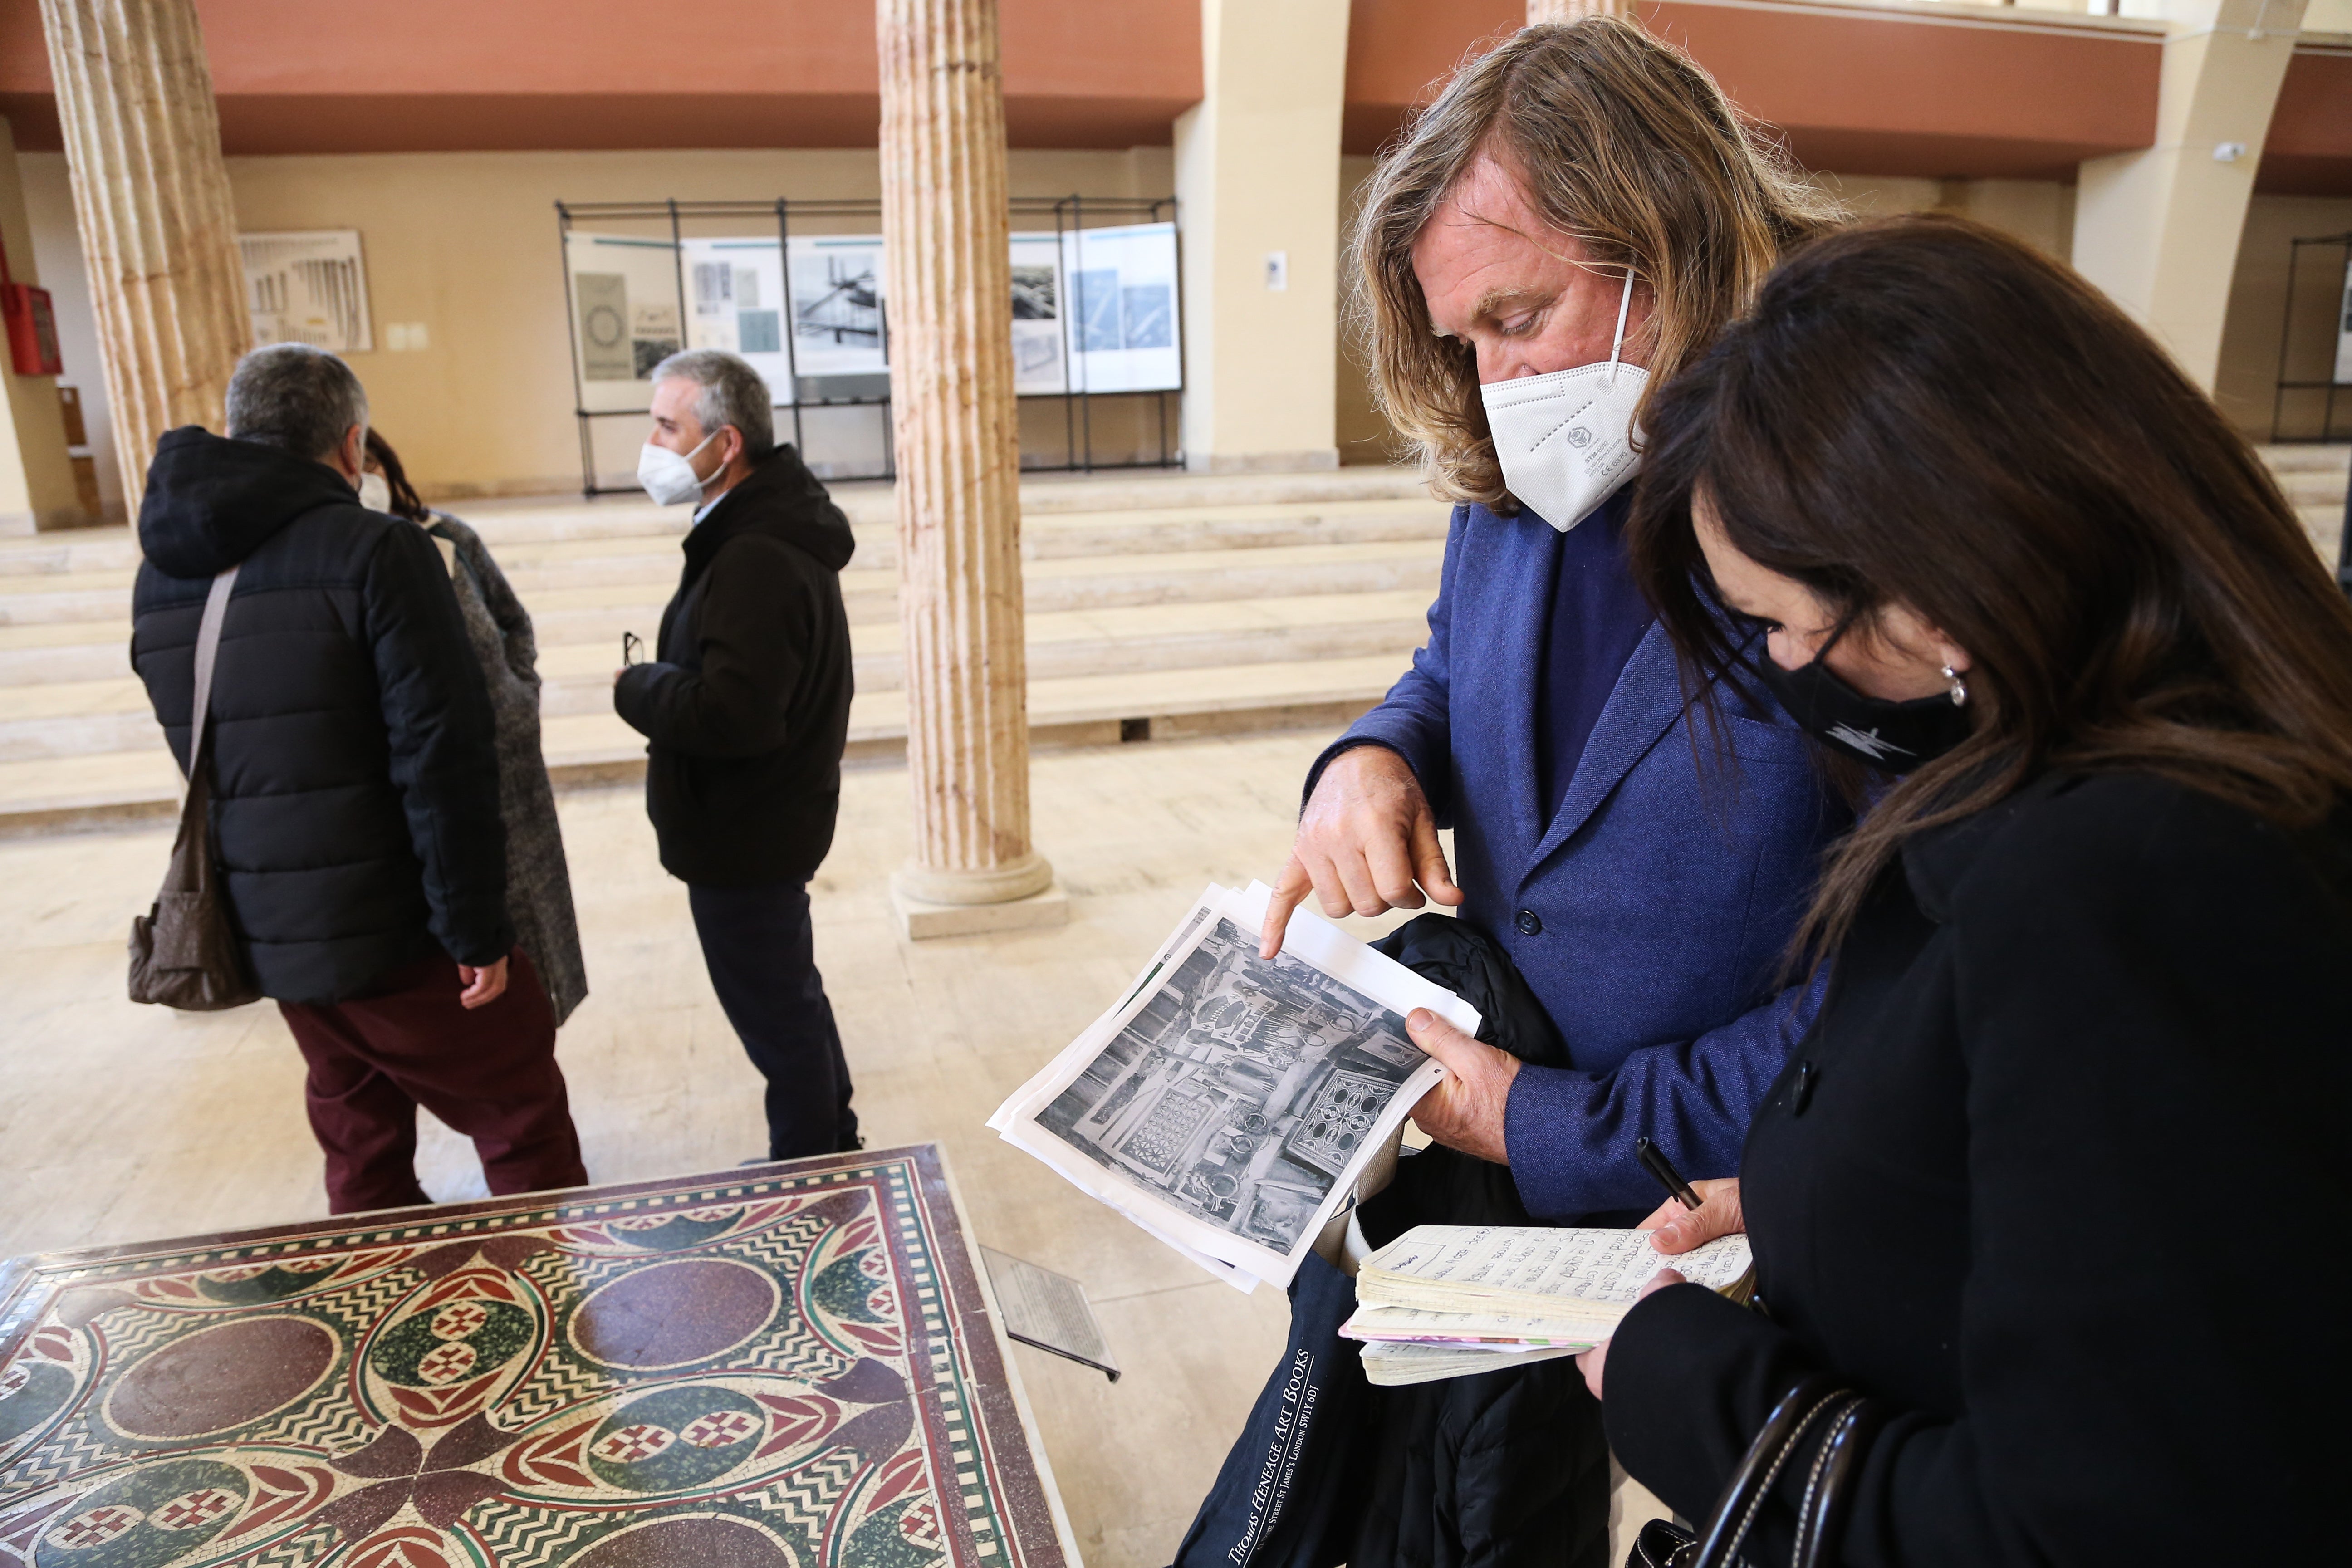 Architect and Italian marble expert Dario Del Bufalo attends the unveiling of the Caligula mosaic at the Museo delle Navi Romane (Museum of the Roman Ships) in Nemi, south of Rome